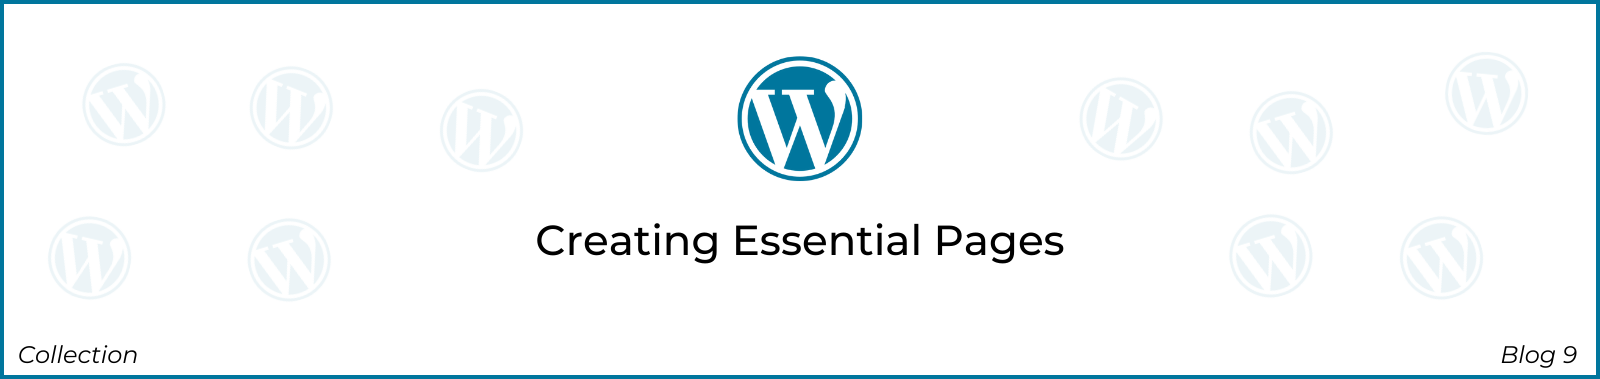 Creating Essential Pages